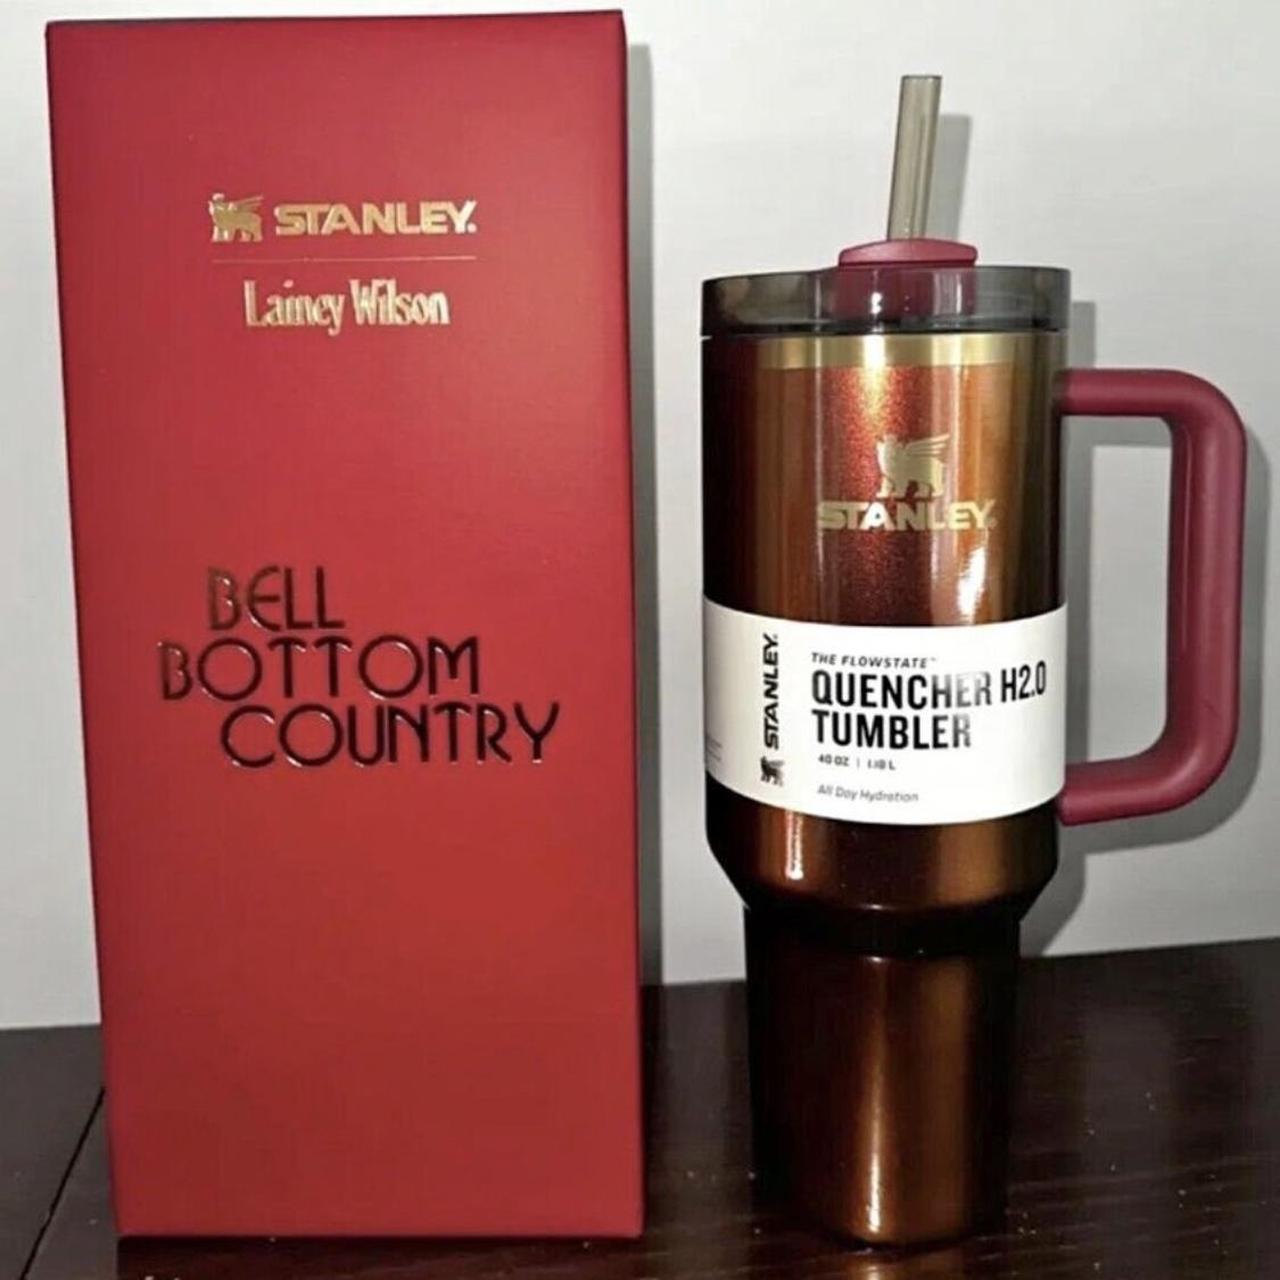 Stanley x Lainey Wilson Quencher H2.0 40 OZ Tumbler Gold Limited Edition